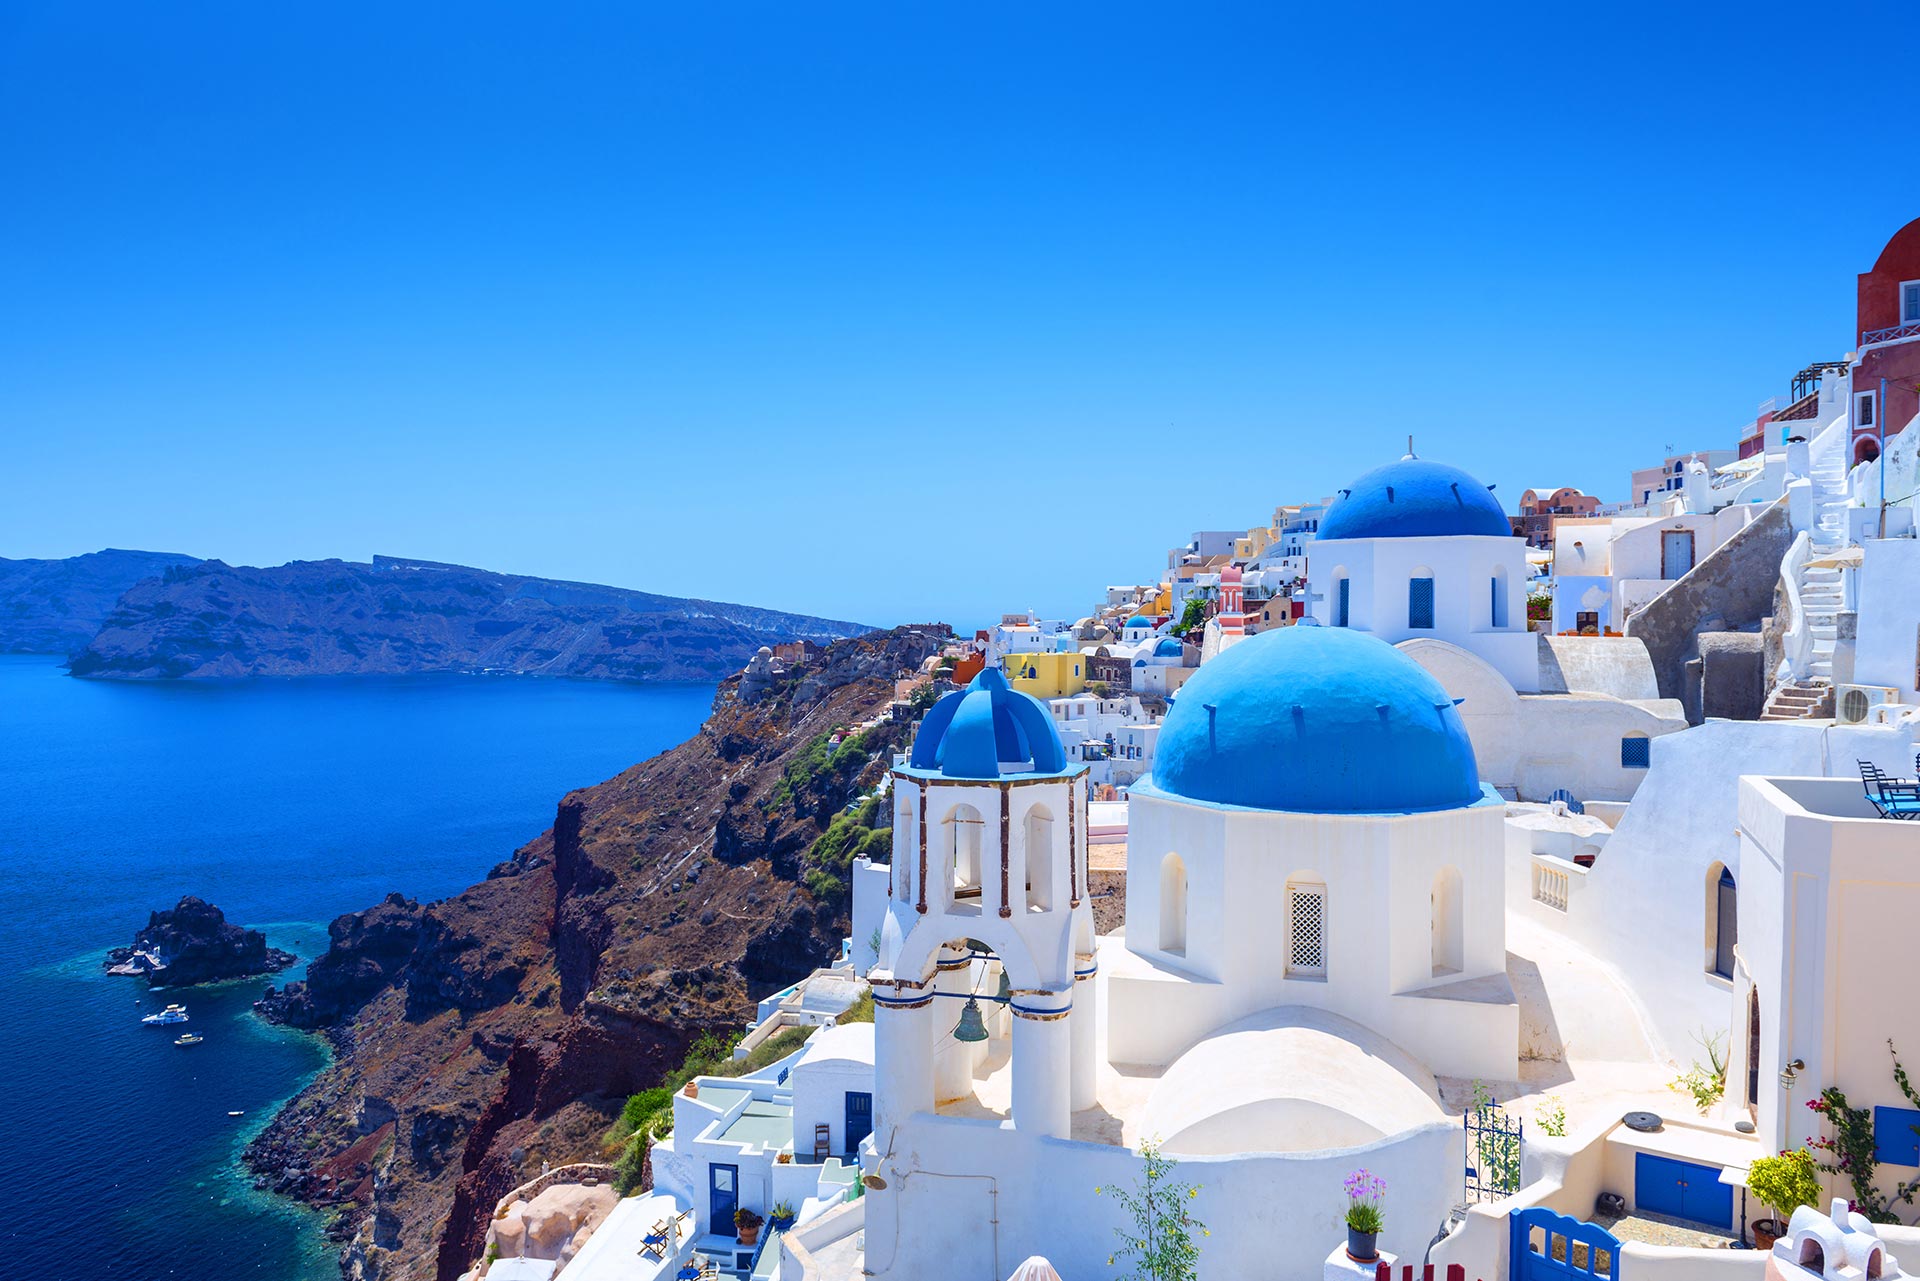 FIND A PLACE AND GET LOST: A SUMMER IN SANTORINI